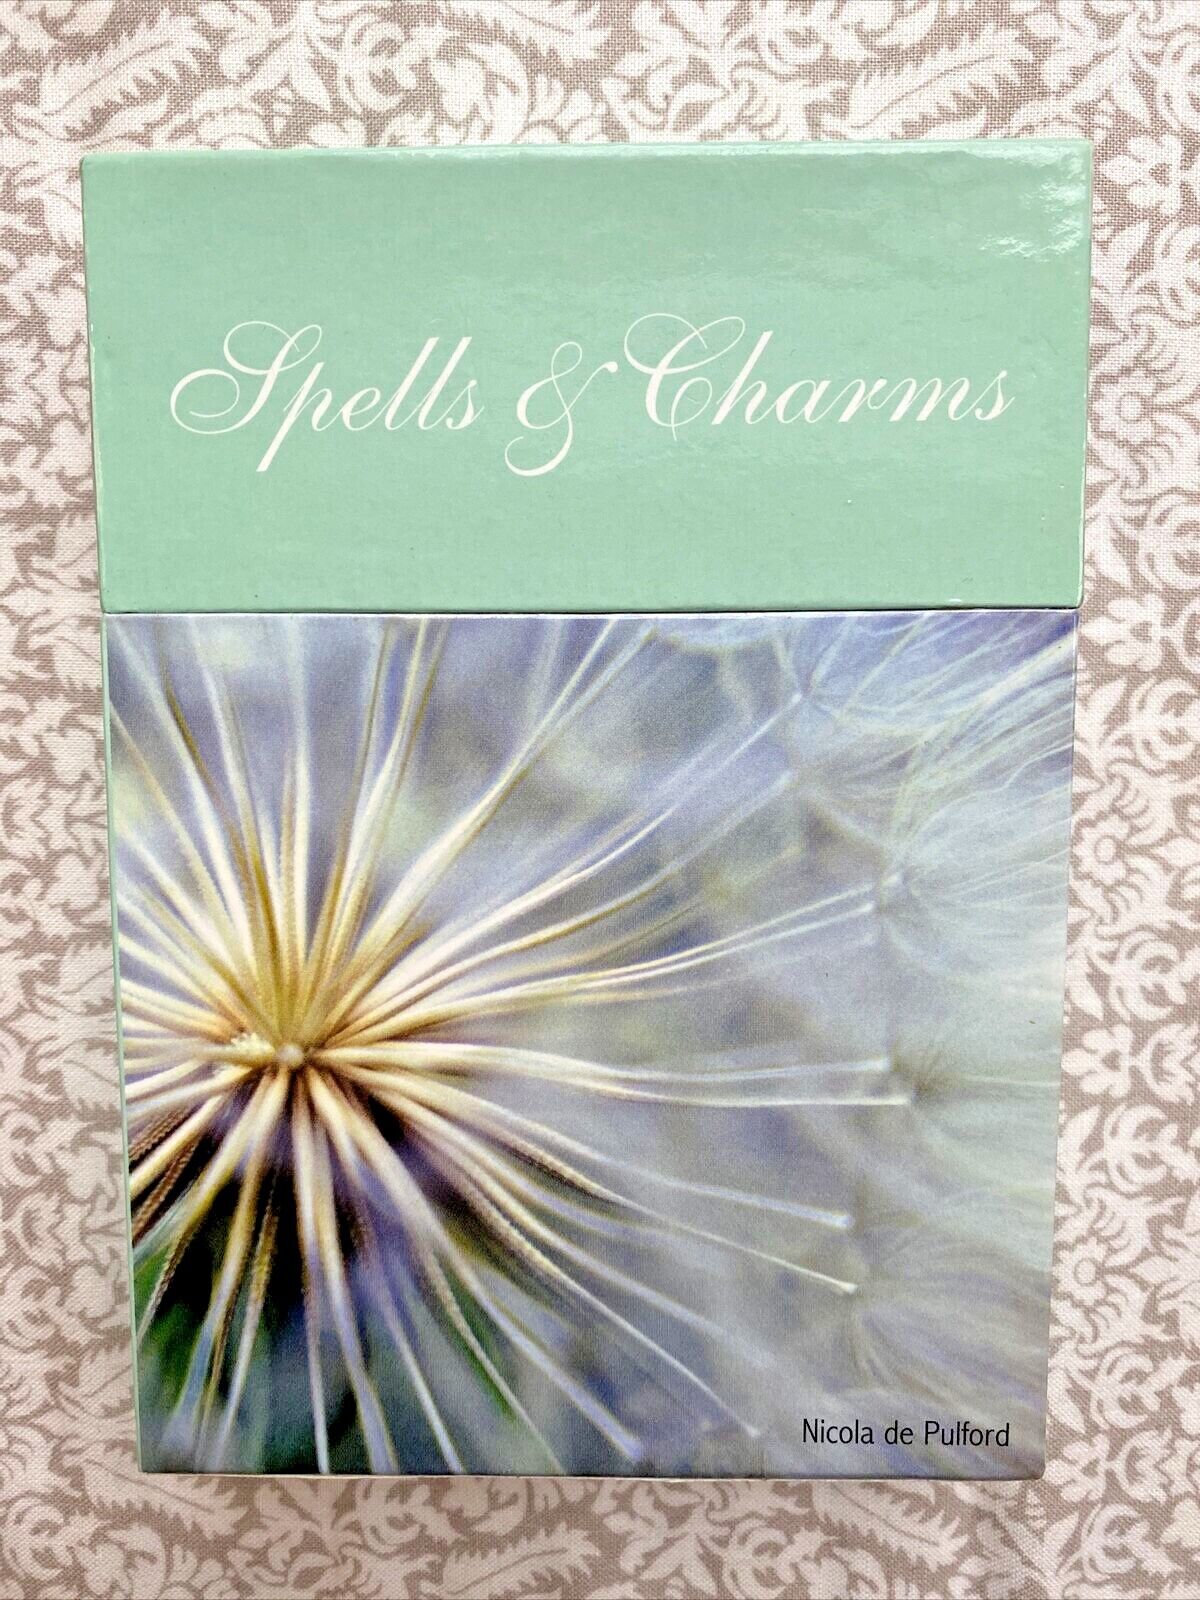 Spells & Charms 50 Card Deck Nicola De Pulford 2008 Metro Edition Occult New